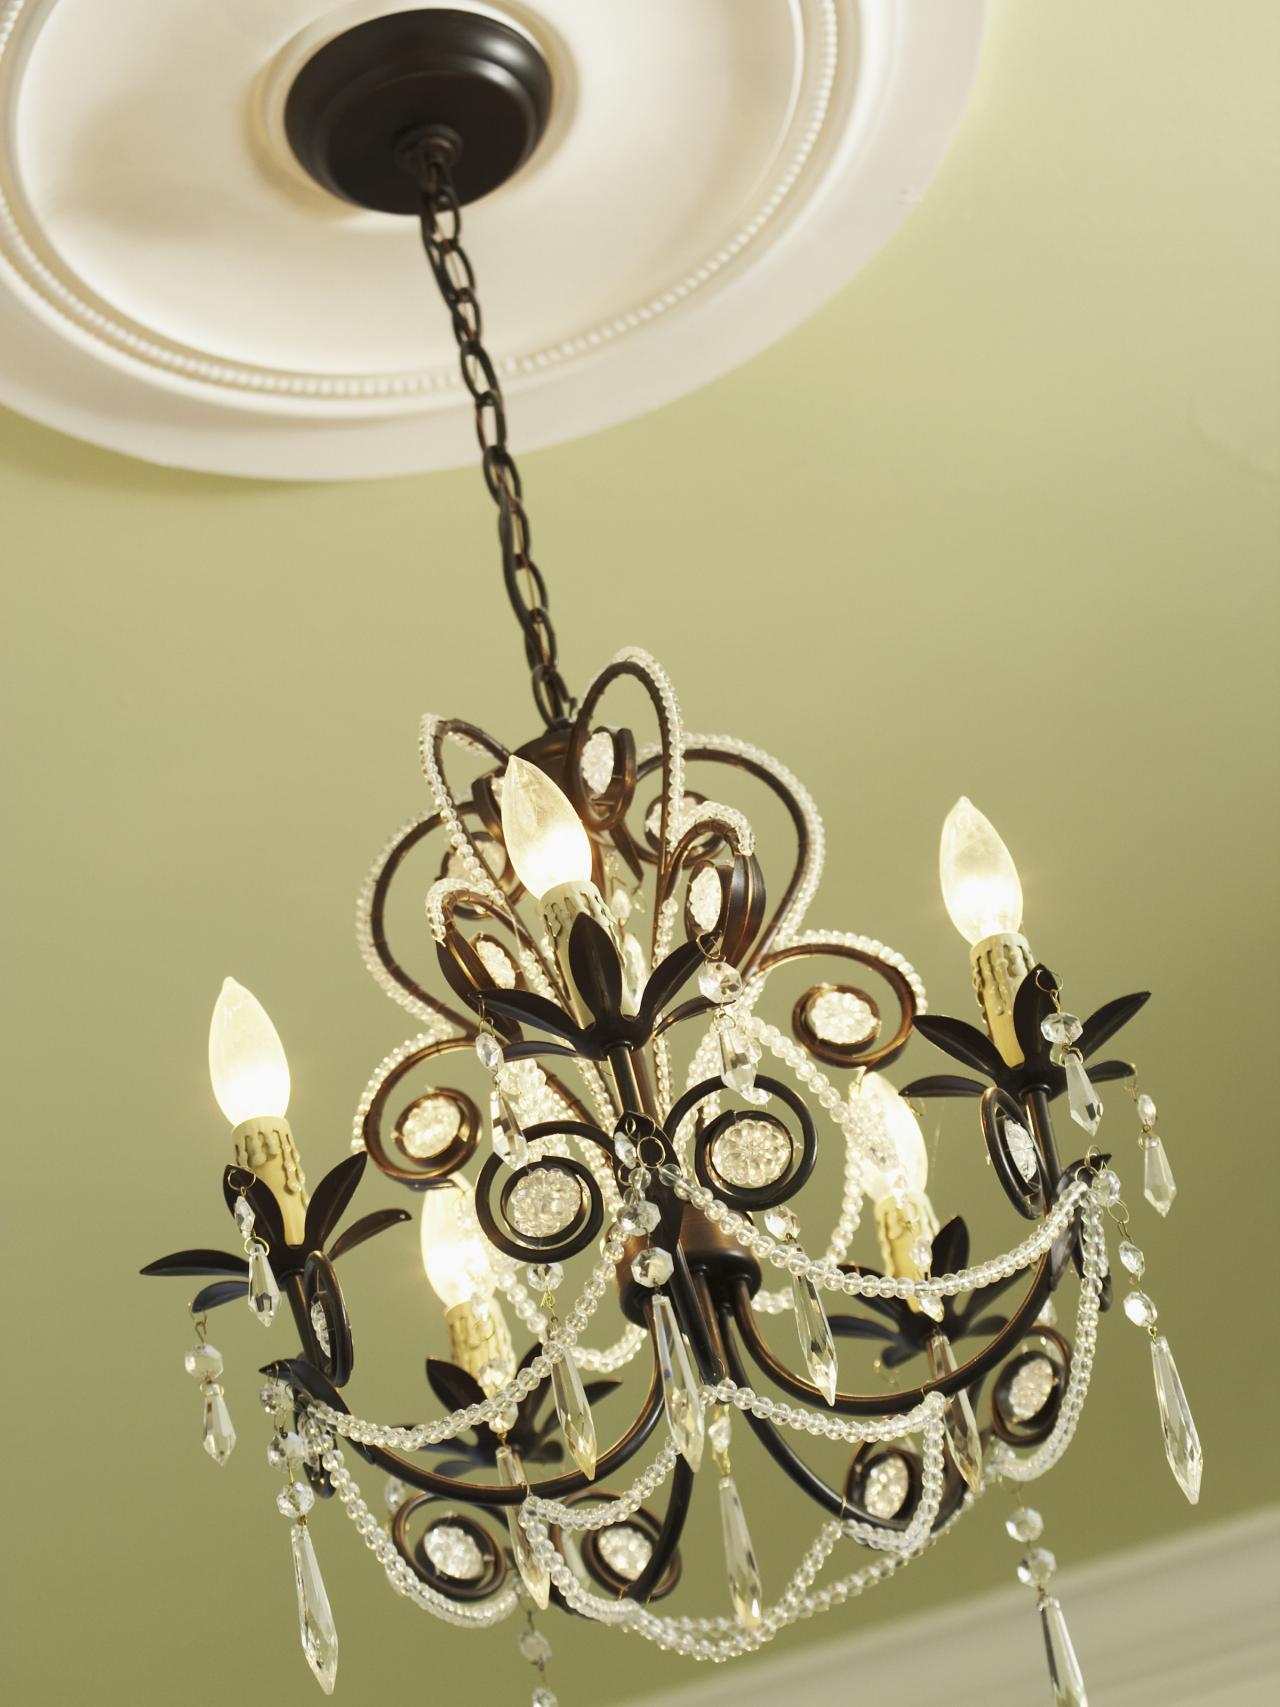 Install A Decorative Ceiling Medallion, How To Install Ceiling Medallion With Chandelier